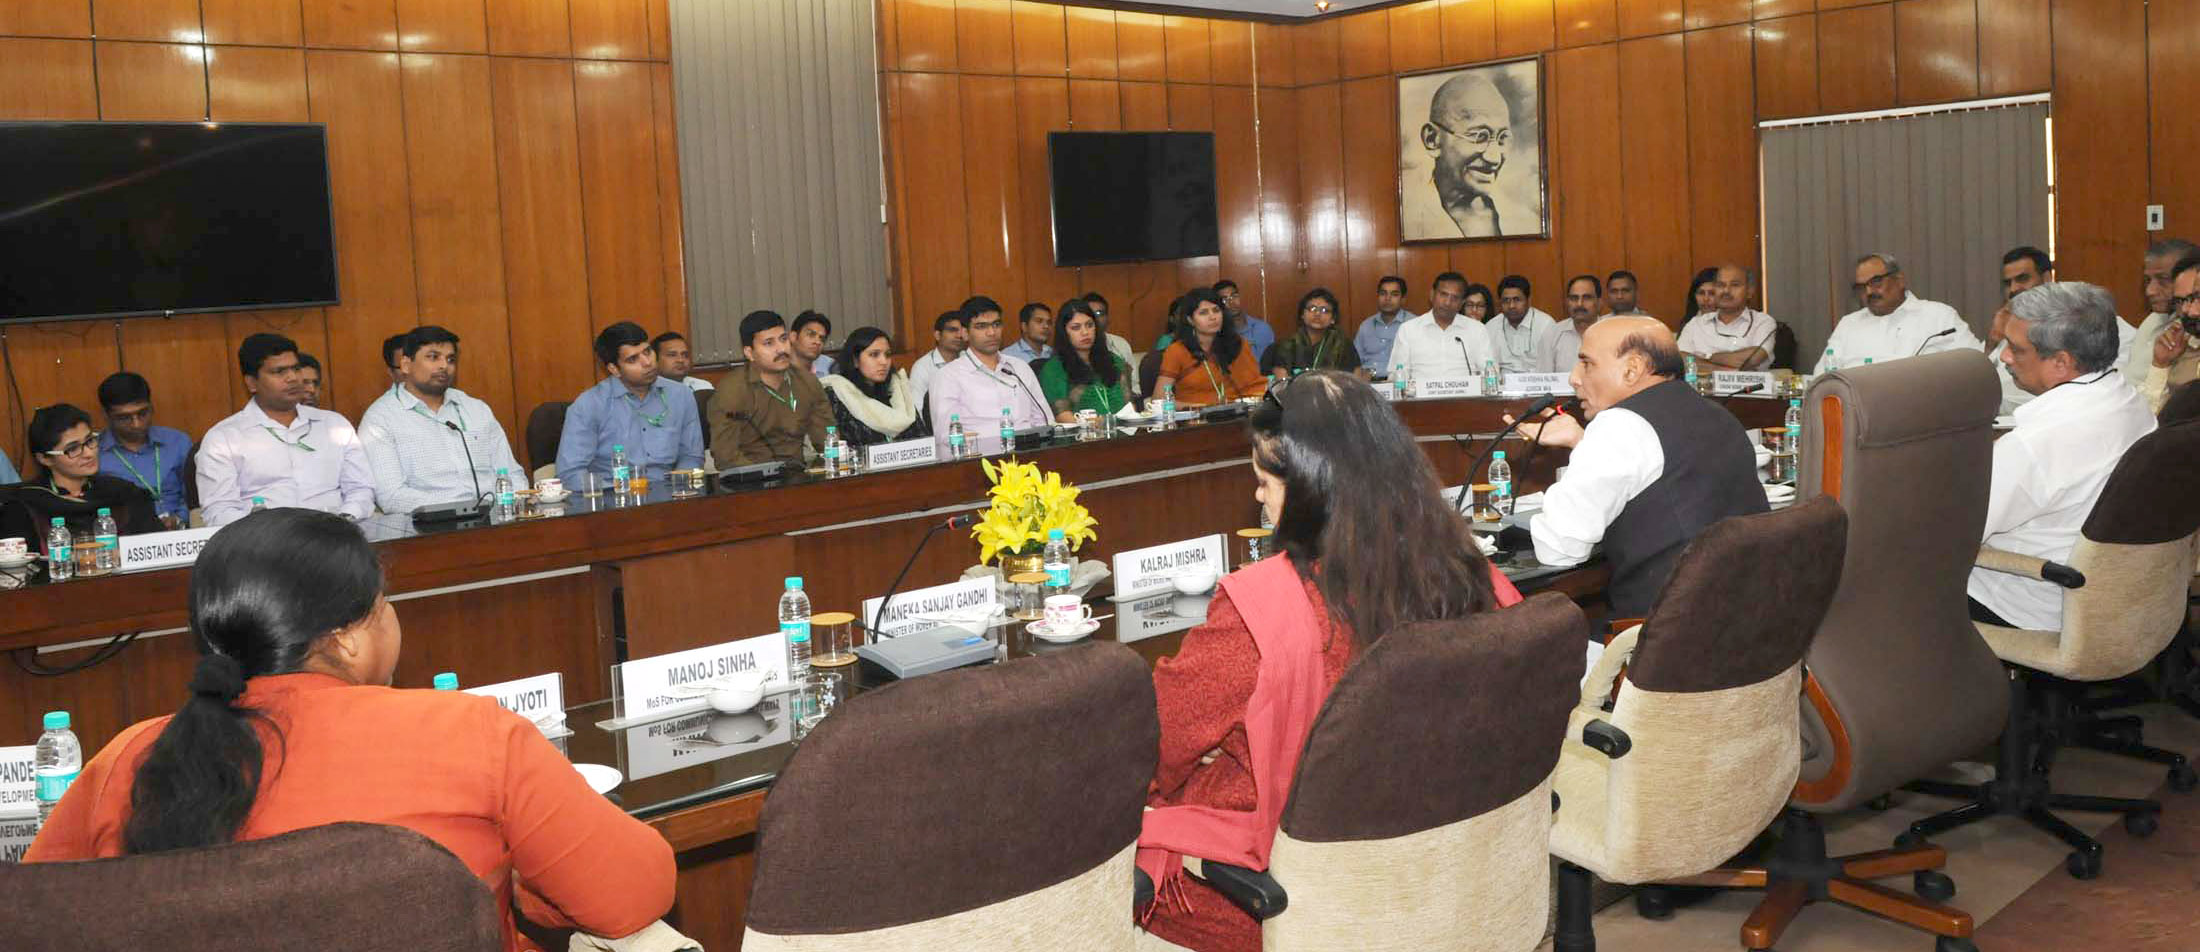 A group of IAS Probationers of Uttar Pradesh cadre (2014 Batch) as well as Probationers who are domicile of Uttar Pradesh, presently posted in various Ministries/Departments as Assistant Secretaries, participated in an interactive session with the Union Ministers led by the Union Home Minister, Shri Rajnath Singh, in New Delhi on October 19, 2016.